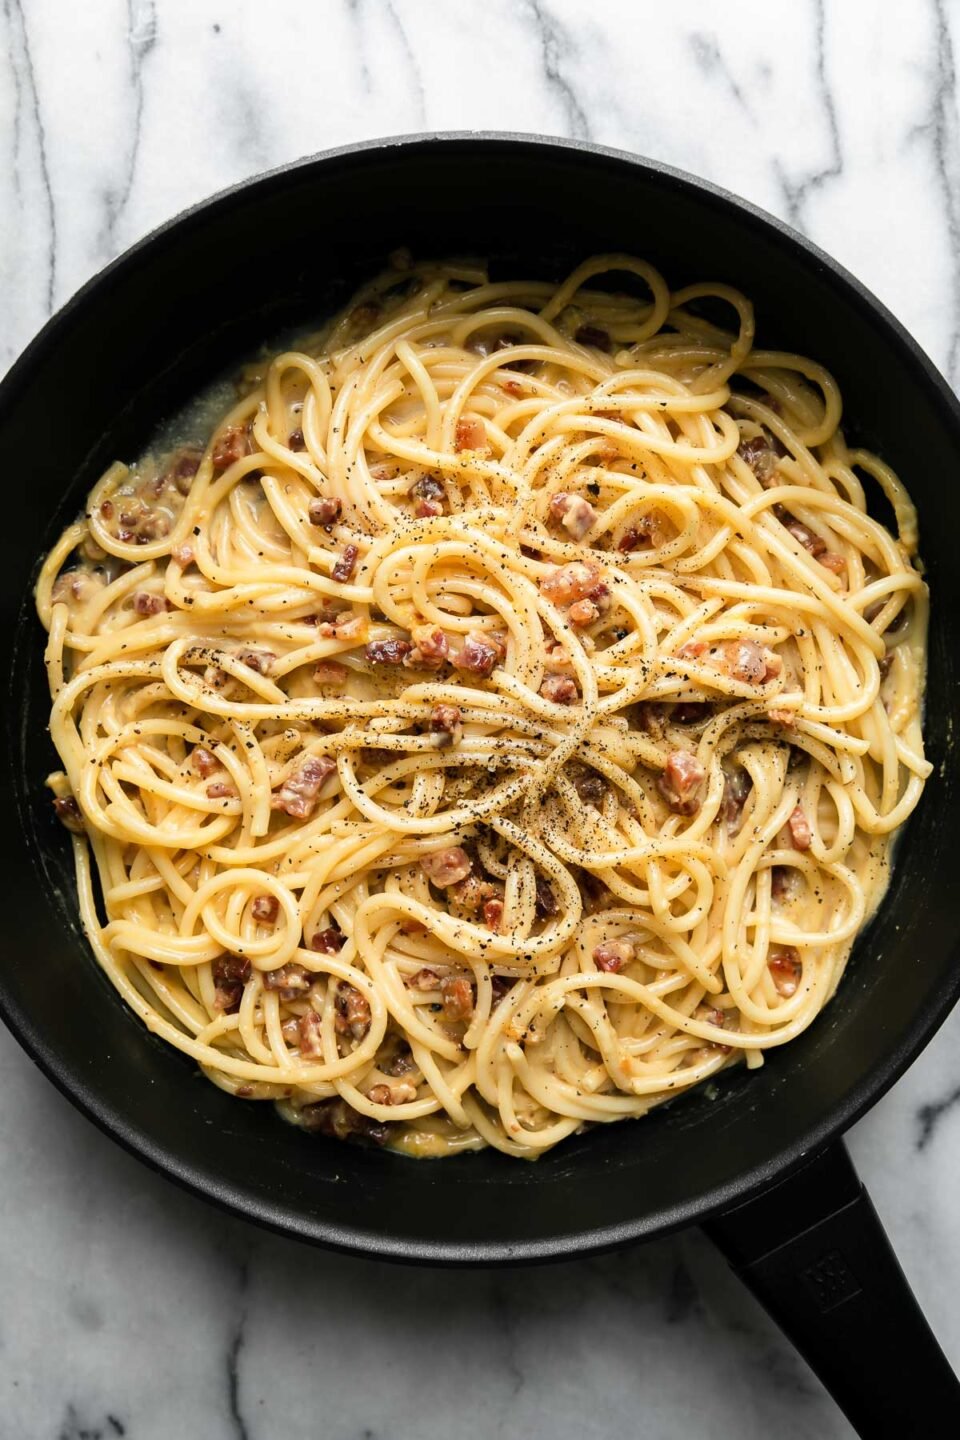 Finished pasta carbonara in a black non-stick skillet garnished with ground black pepper. The skillet sits atop a gray and white marble surface.